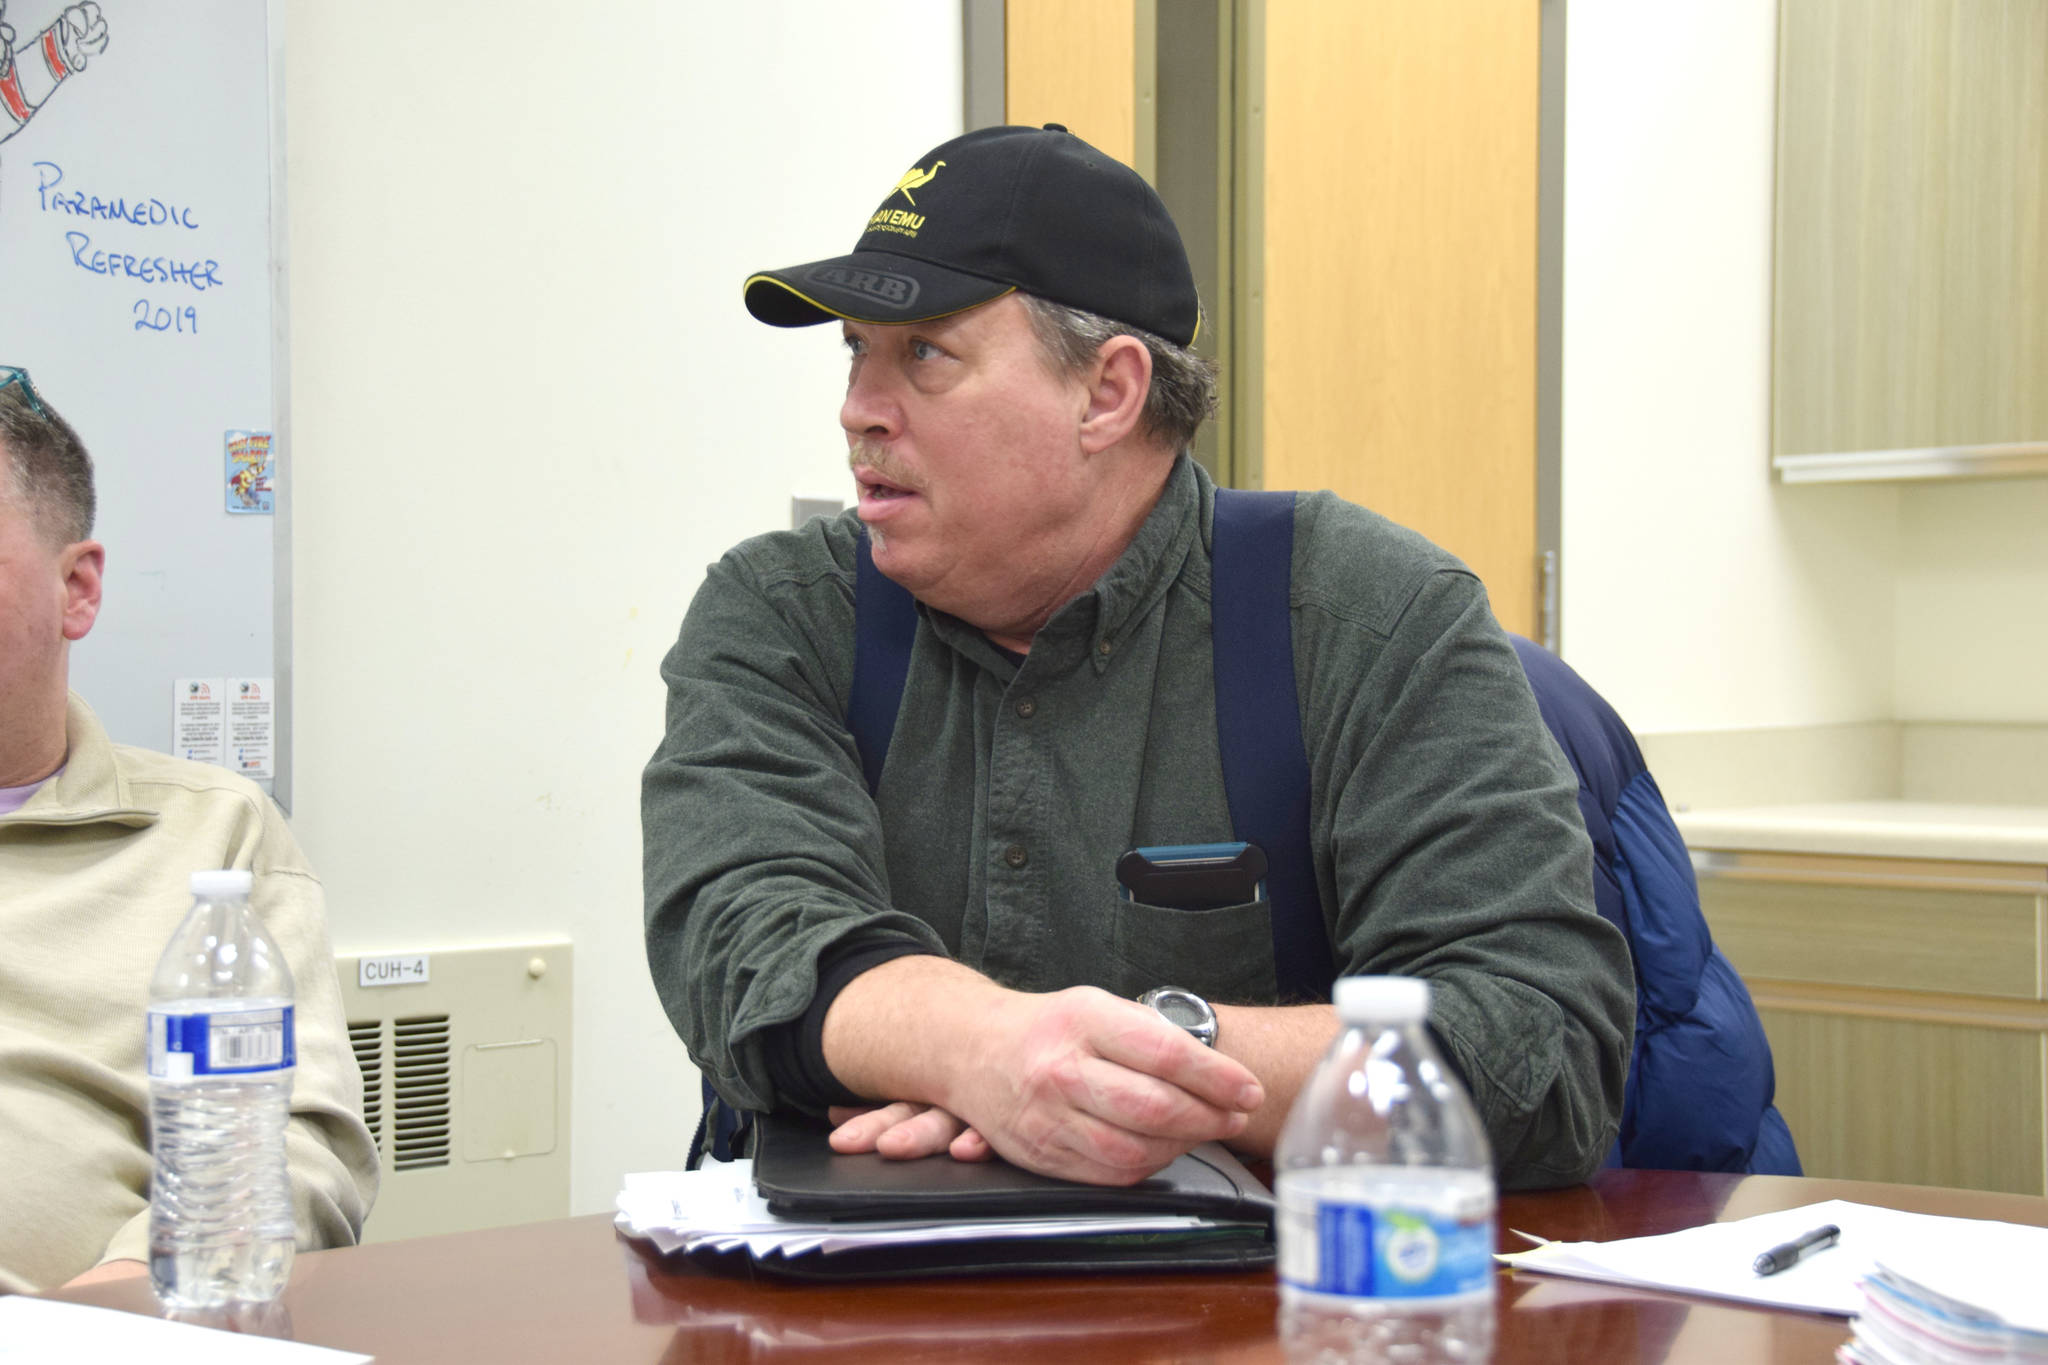 Paul Huber, co-chair of the Citizens for Nikiski Incorporation, speaks at a meeting at the Nikiski Fire Station 2 on Thursday, Jan. 24, 2019.